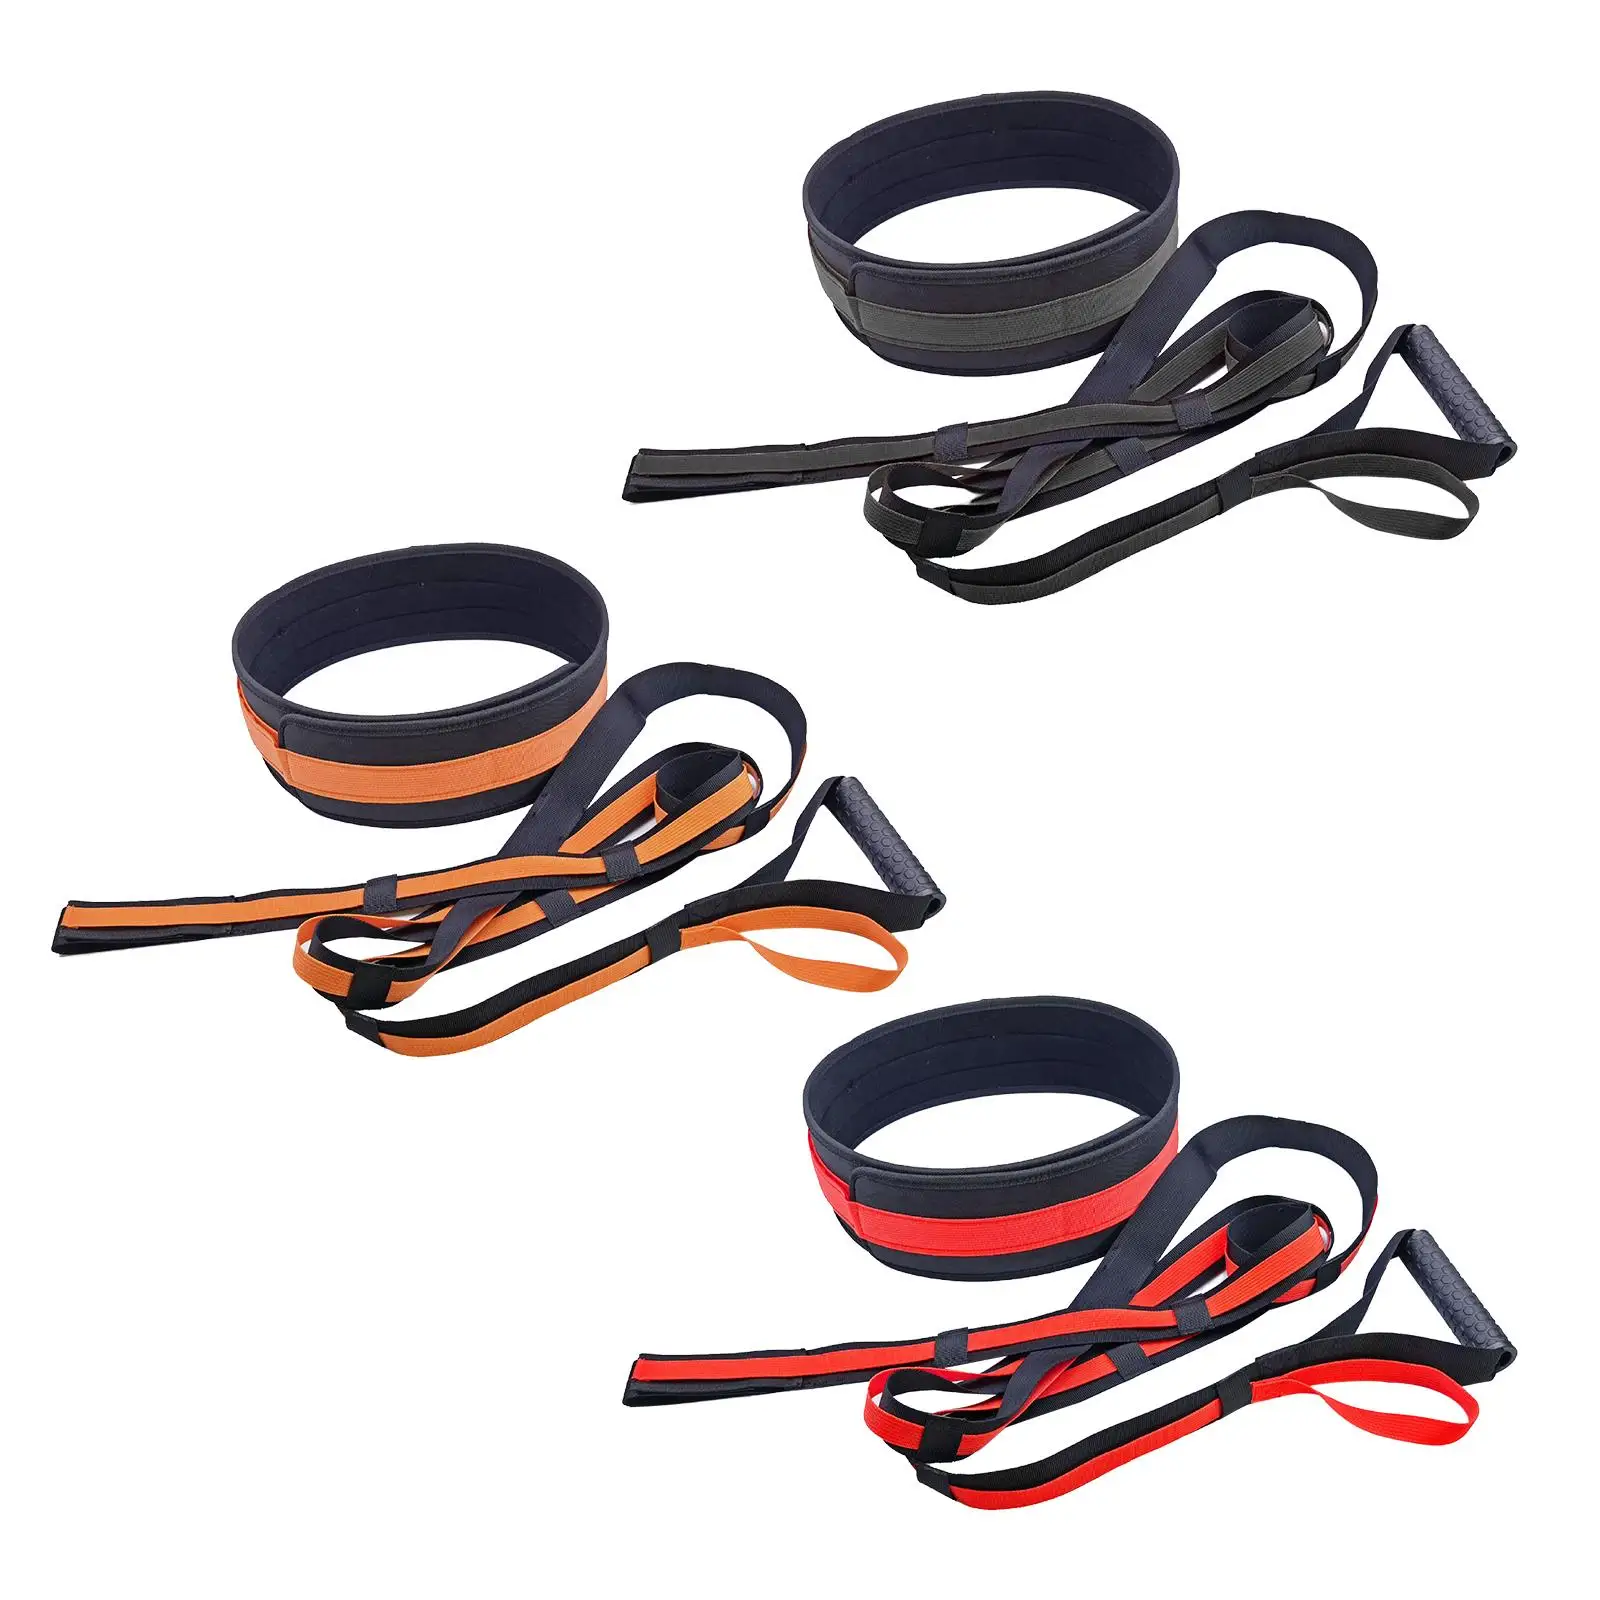 Resistance Running Bungee Band Speed Training Kit for Training Gym Workout